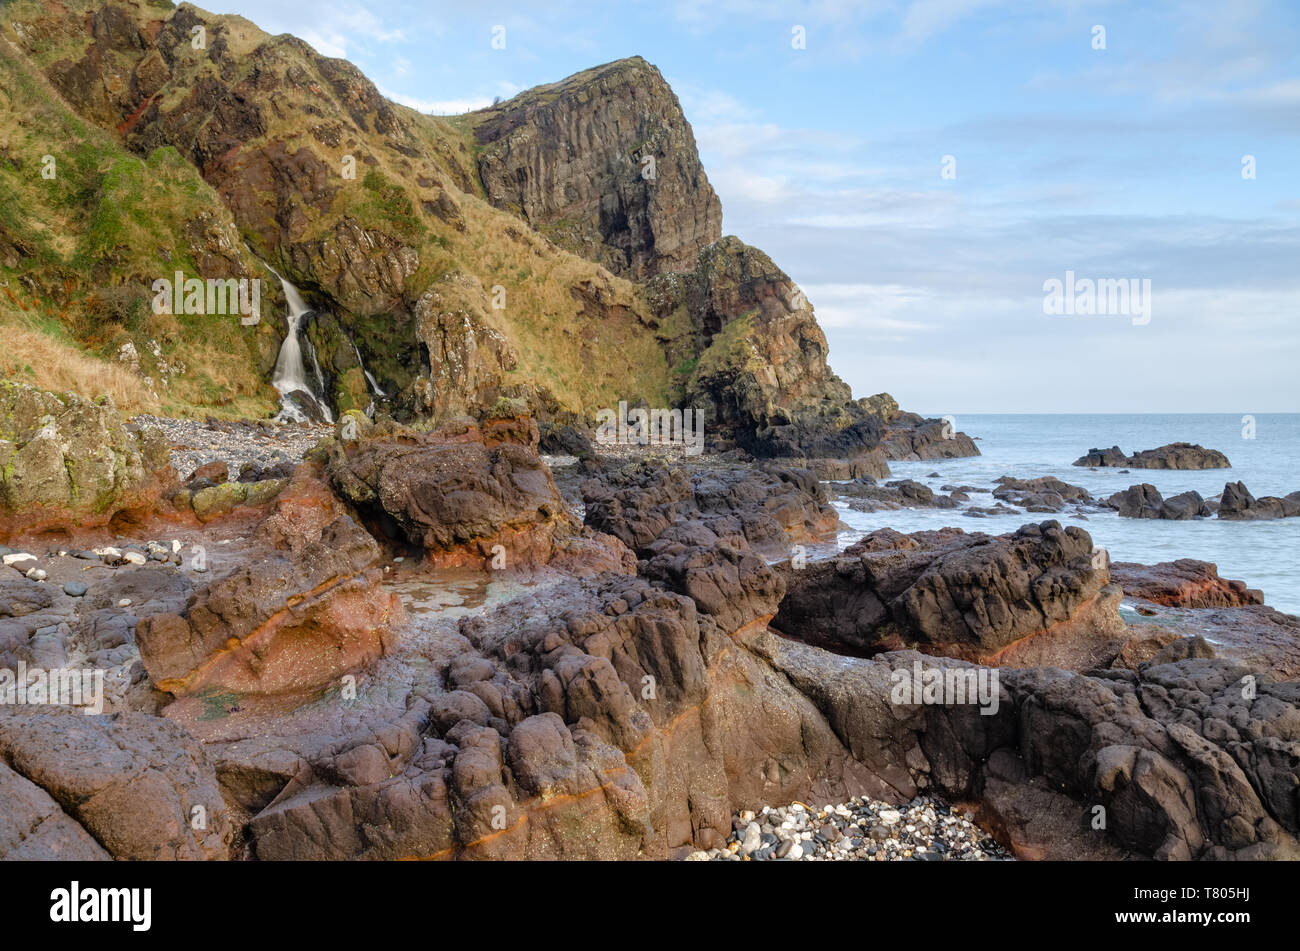 The Gobbins is a cliff-face path etched out along the dramatic shoreline of Islandmagee, County Antrim, Northern Ireland along the Causeway Coast. Stock Photo